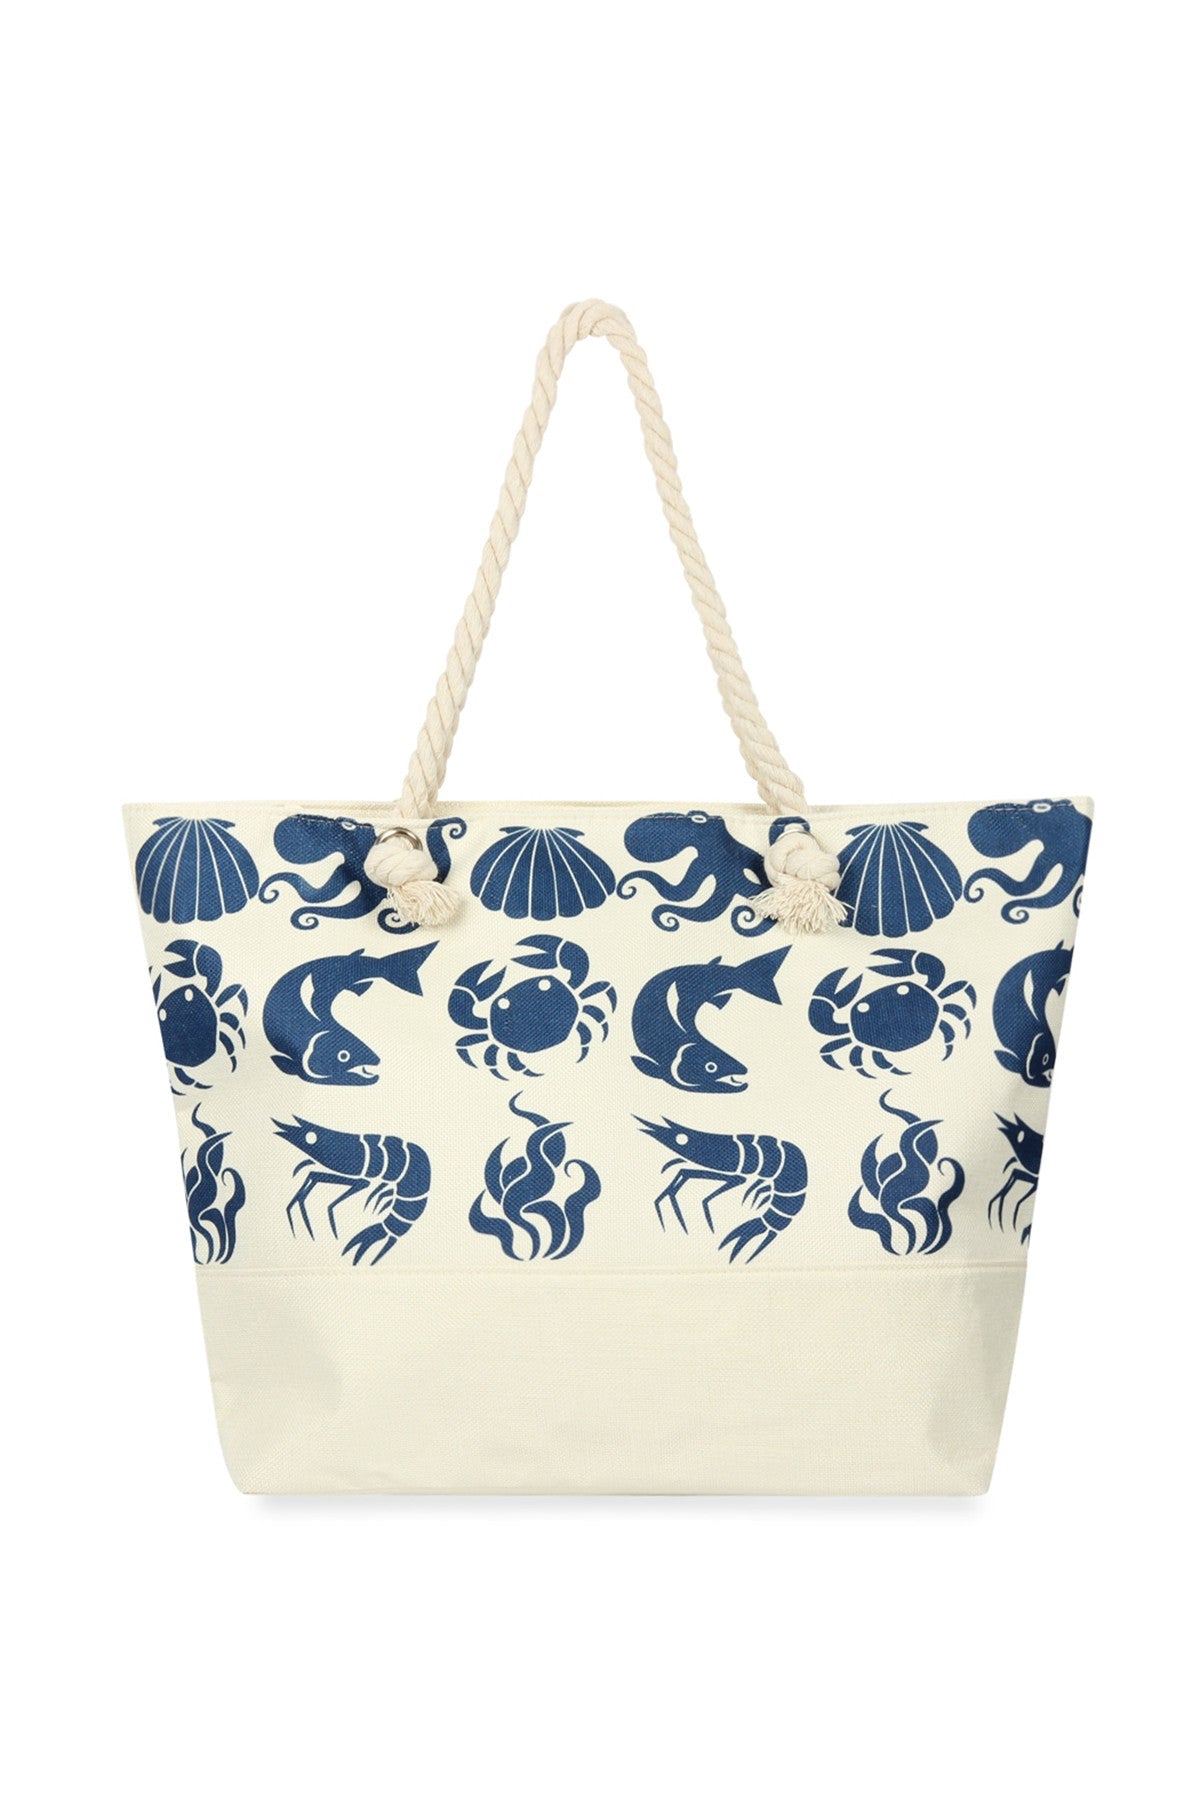 SEA CREATURES PRINTED TOTE BAG/6PCS (NOW $3.00 ONLY!)